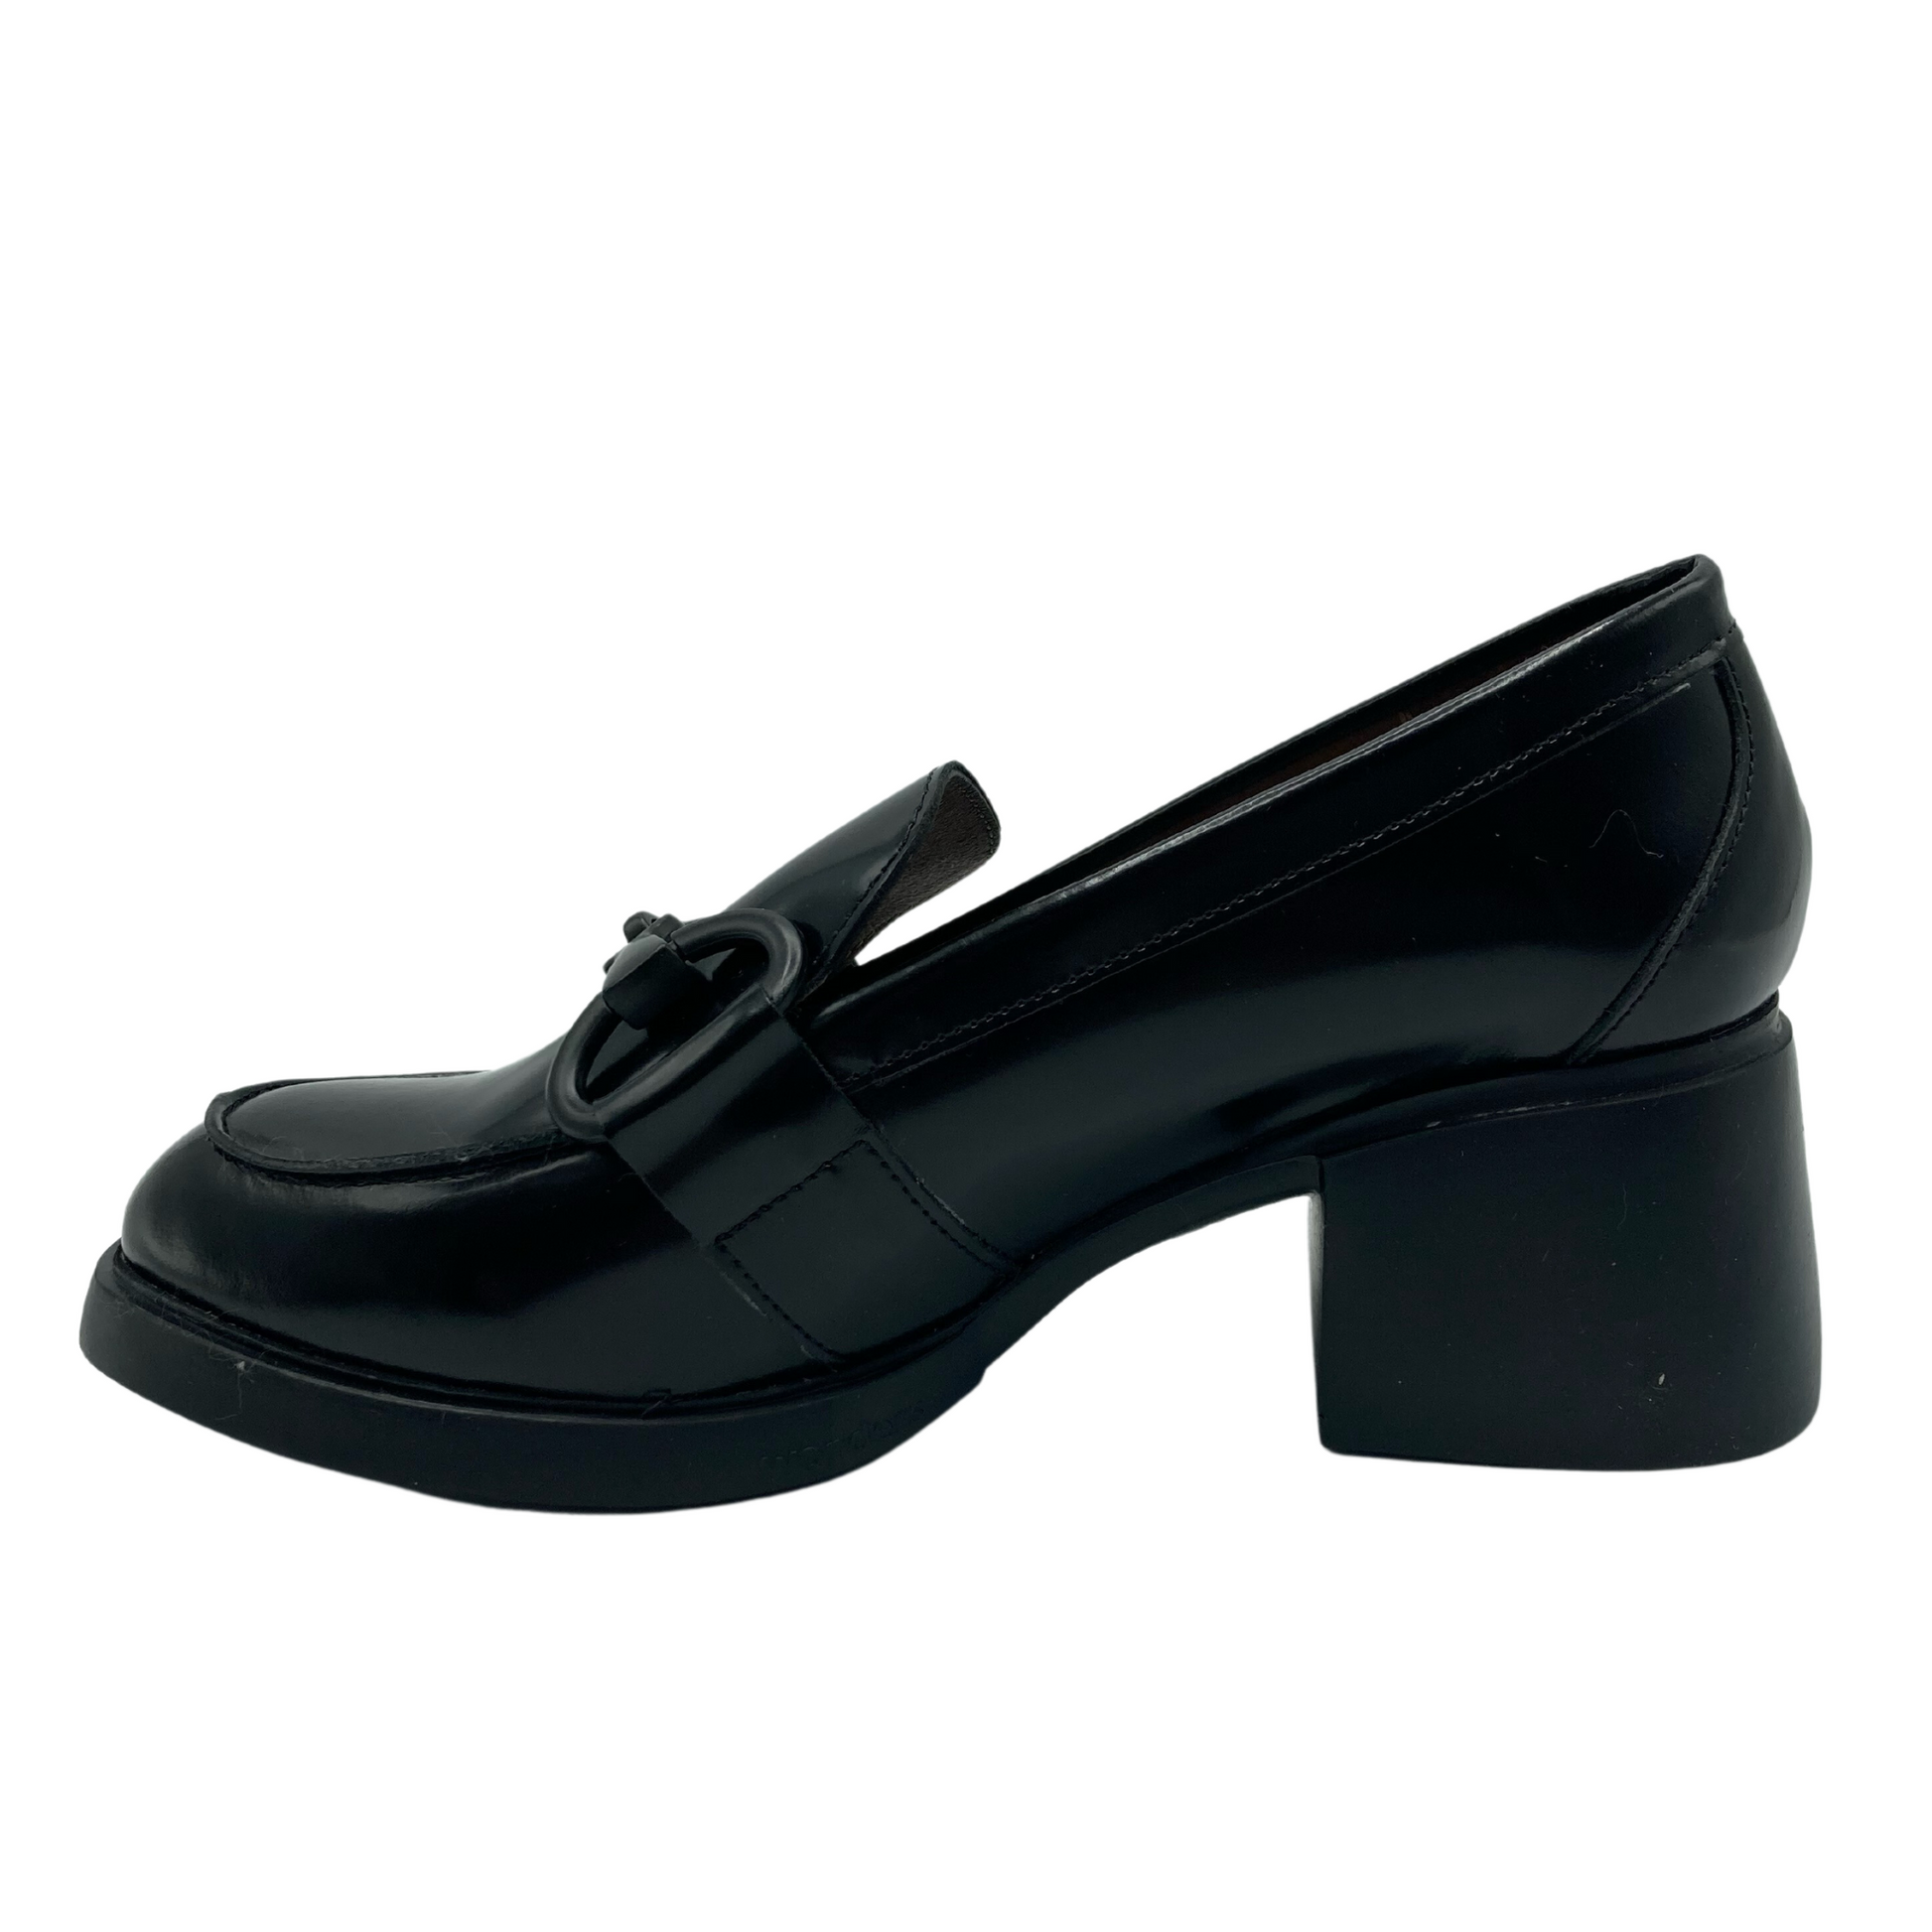 Left facing view of heeled leather loafer 